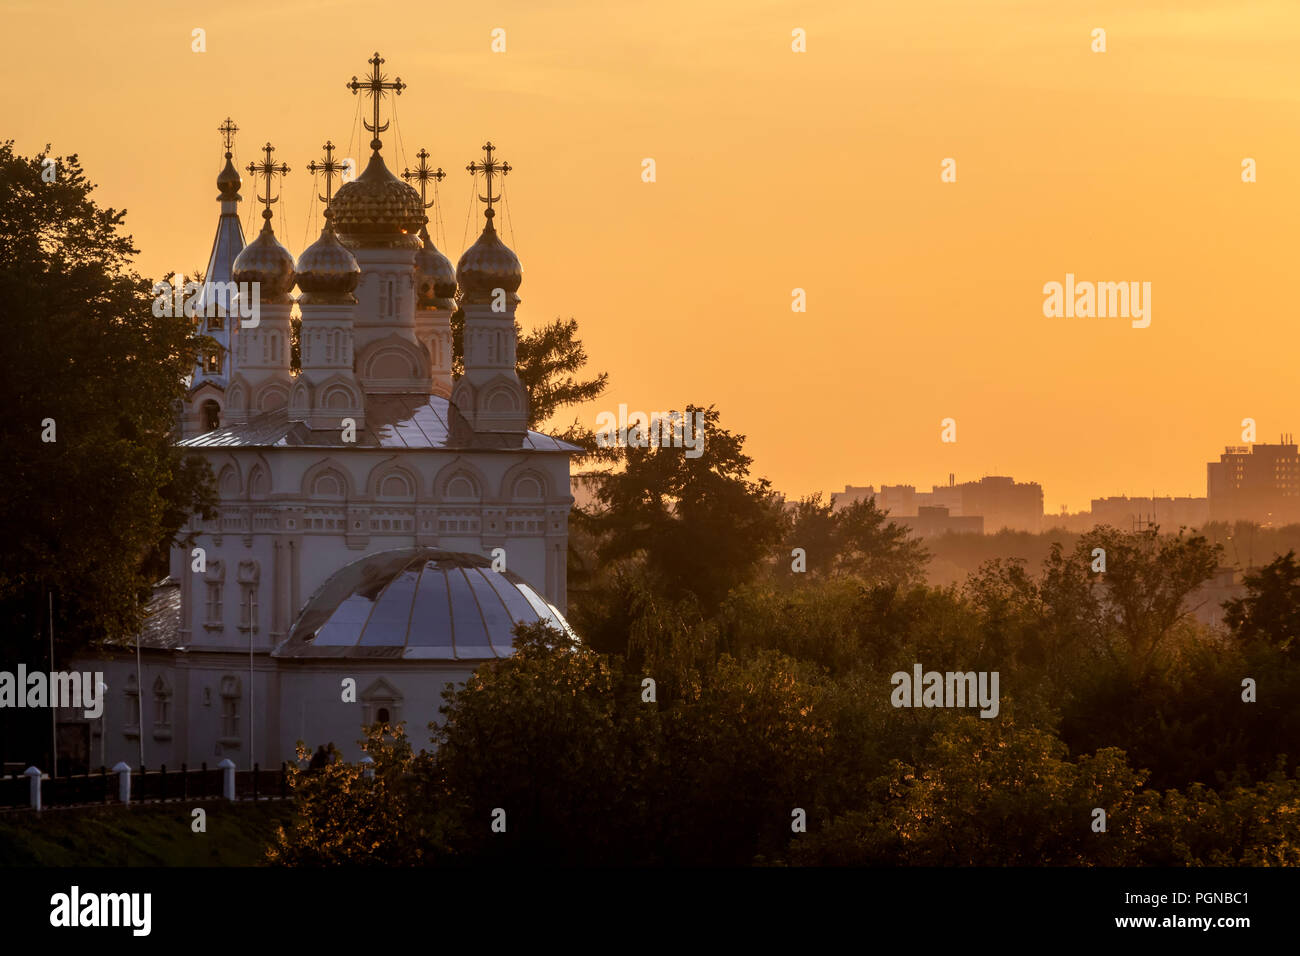 View of the Church of the Savior's Transfiguration on Yar in Ryazan during sunset, Russia Stock Photo